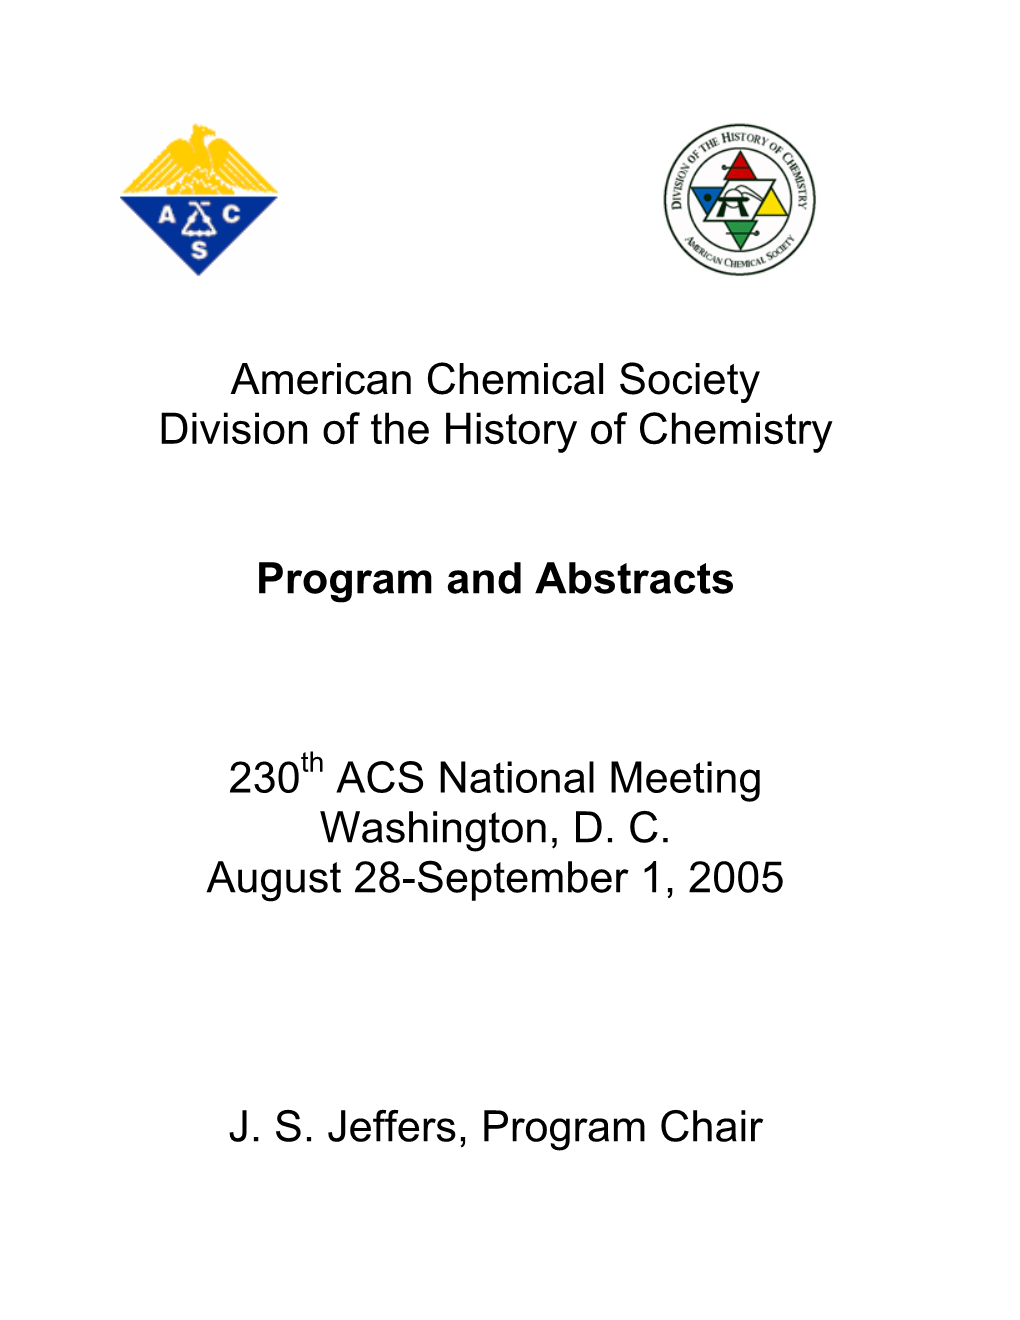 American Chemical Society Division of the History of Chemistry Program